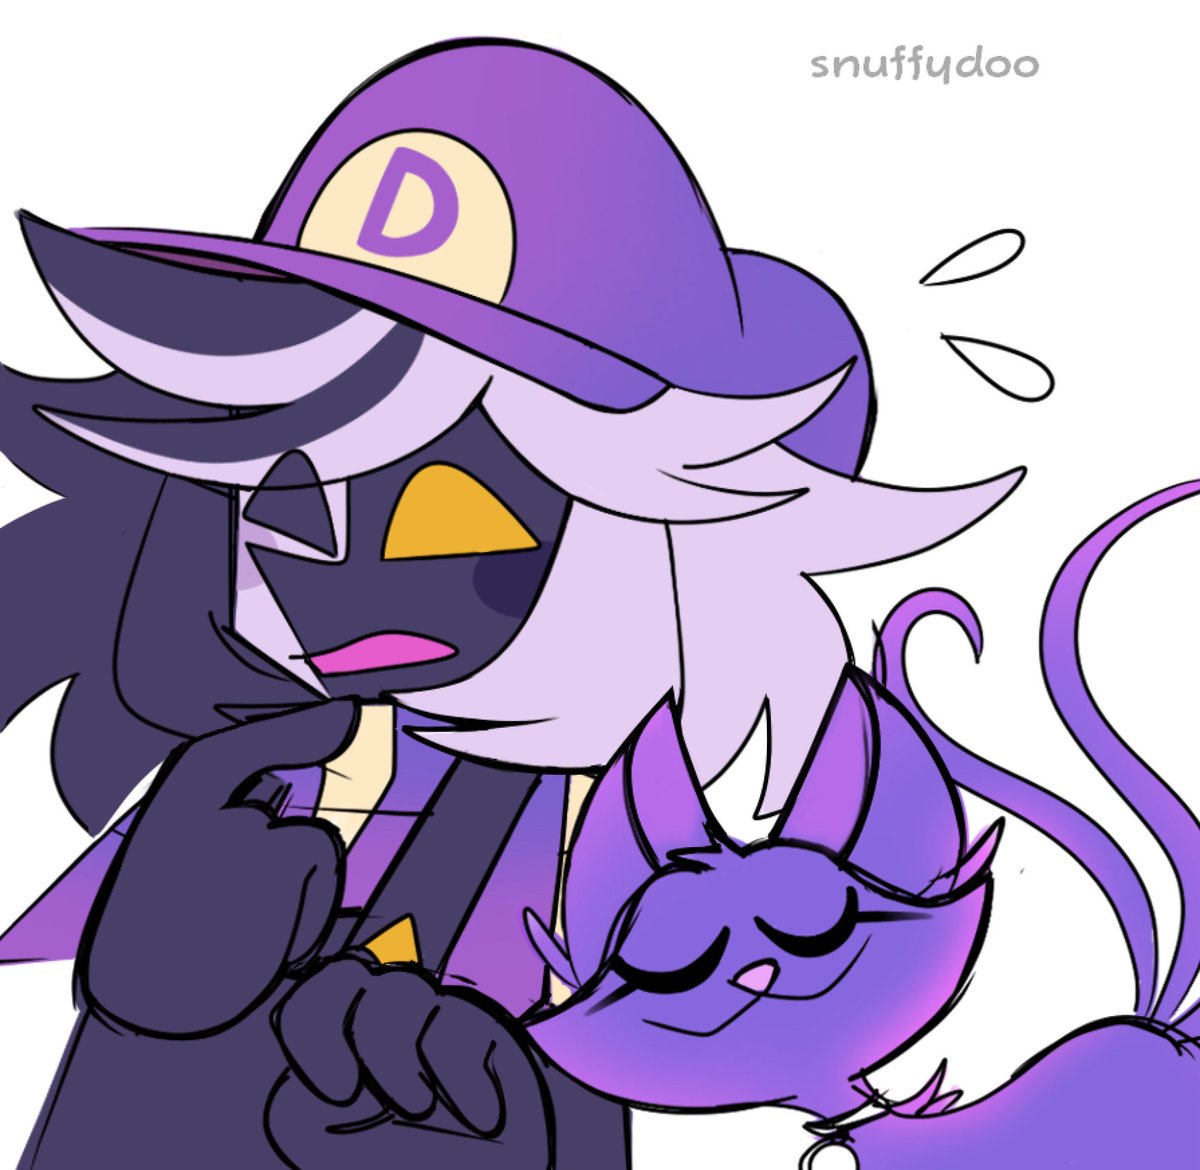 [swap au]   
Instead of polterpup, he gets the kitty
#Superpapermario #Papermario #SuperMario #Mario #Nintendo #MarioBros